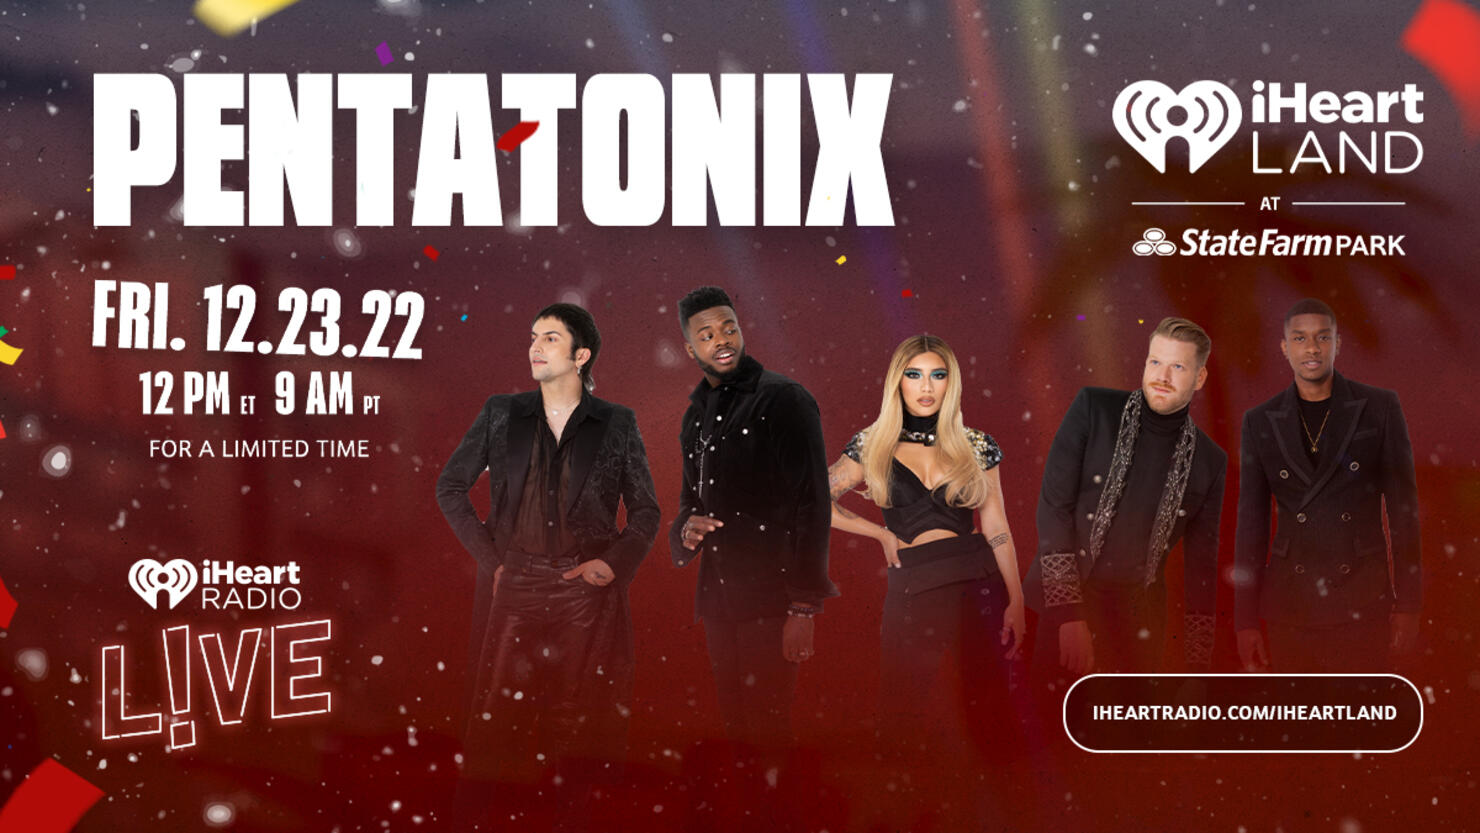 Ring In The Holidays With Pentatonix In The Metaverse